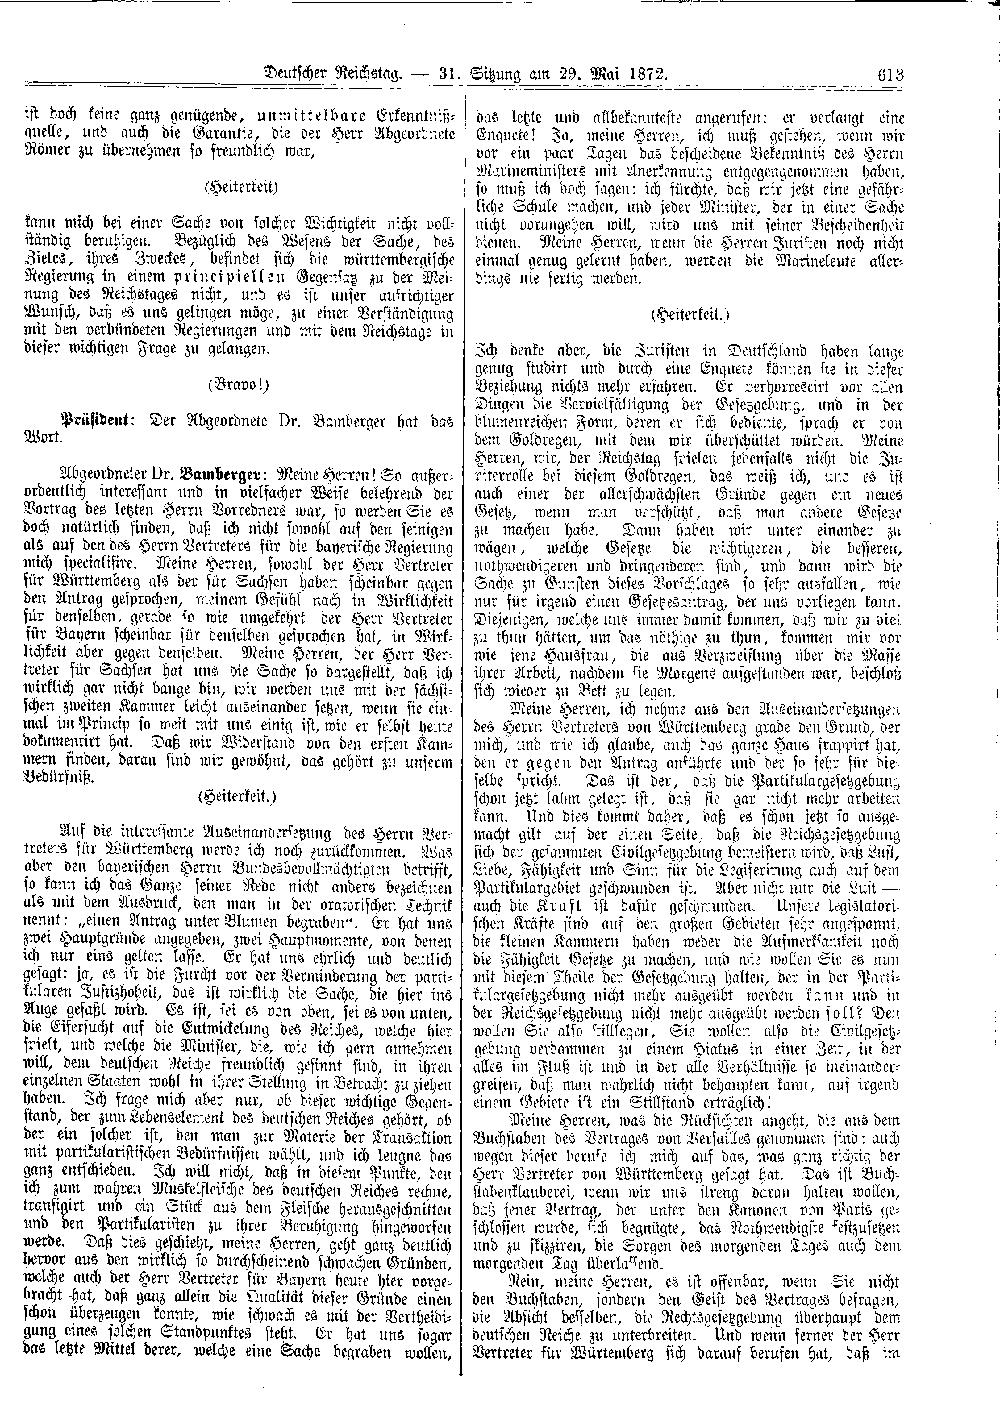 Scan of page 613